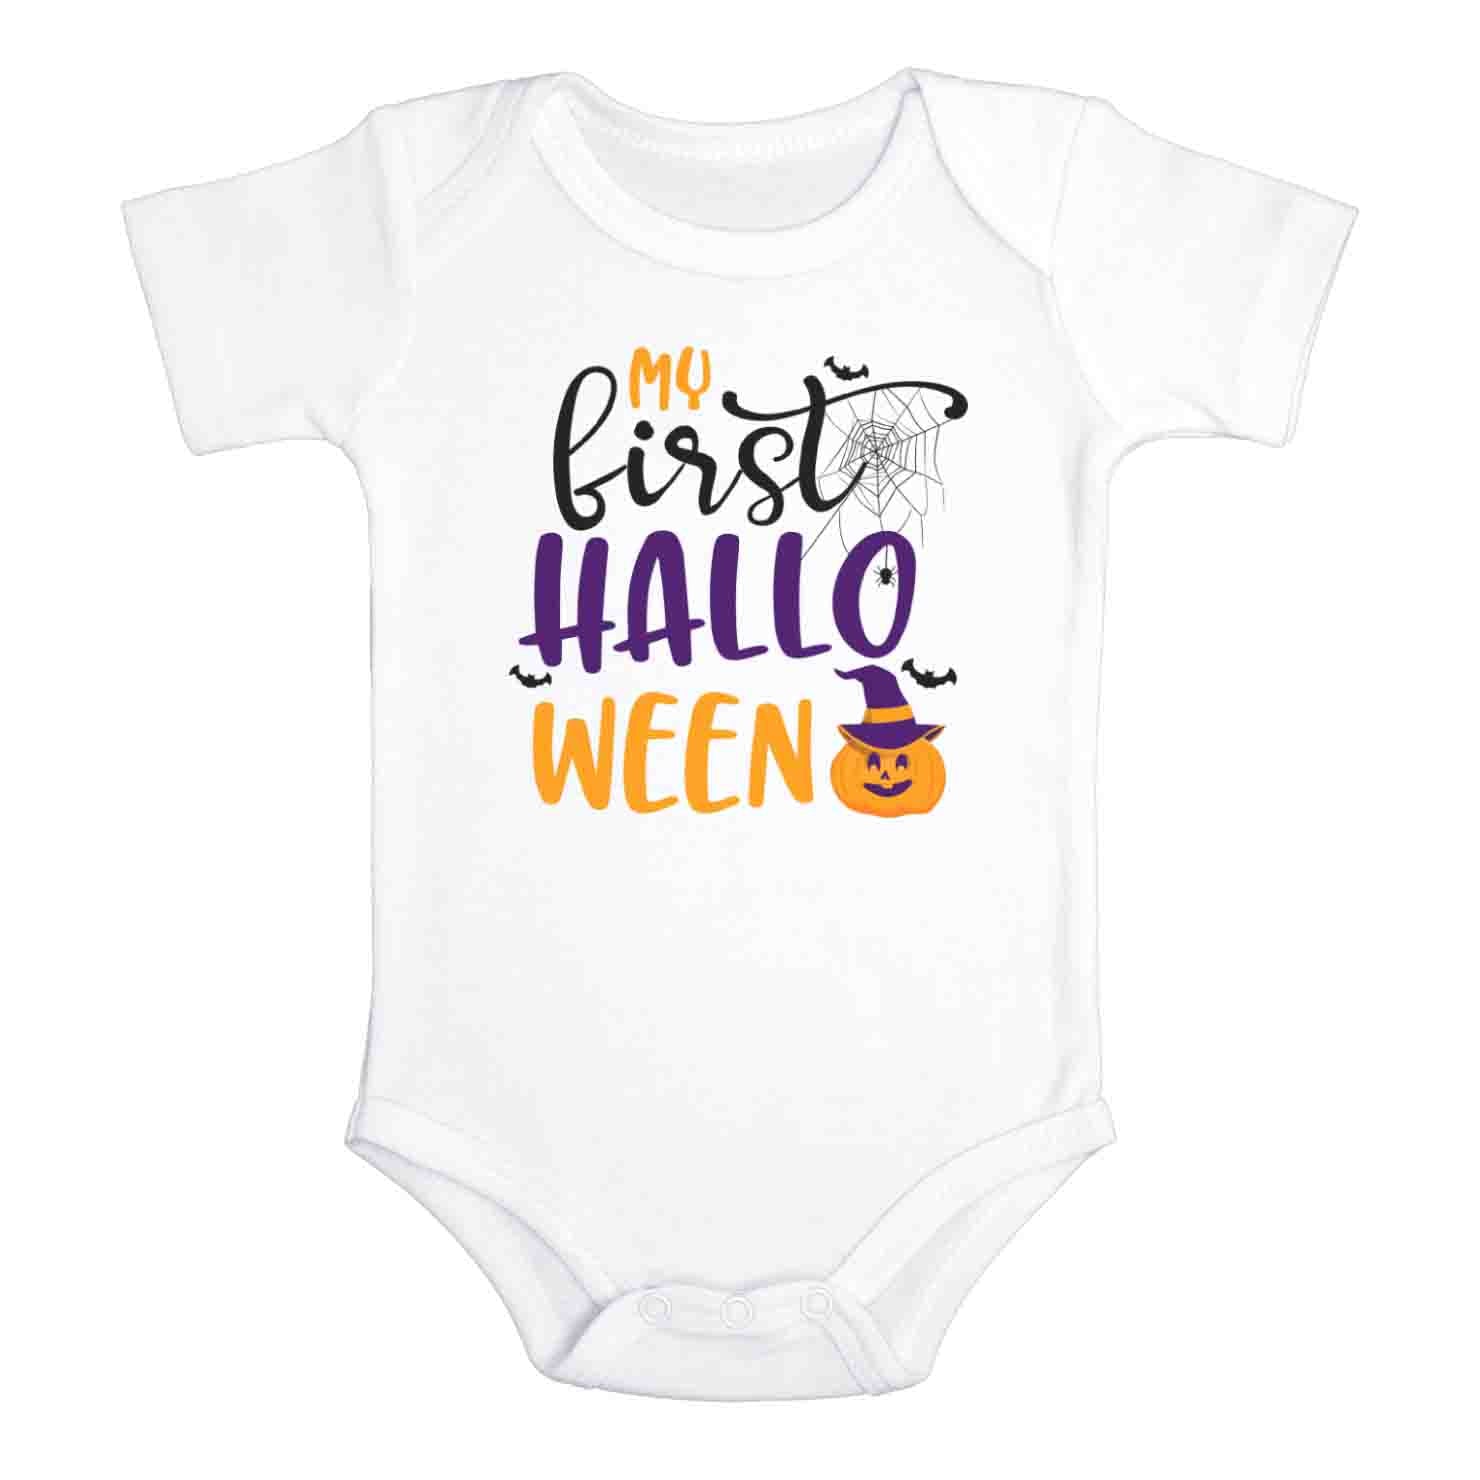 MY FIRST HALLOWEEN Funny baby onesies bodysuit (white: short or long sleeve)